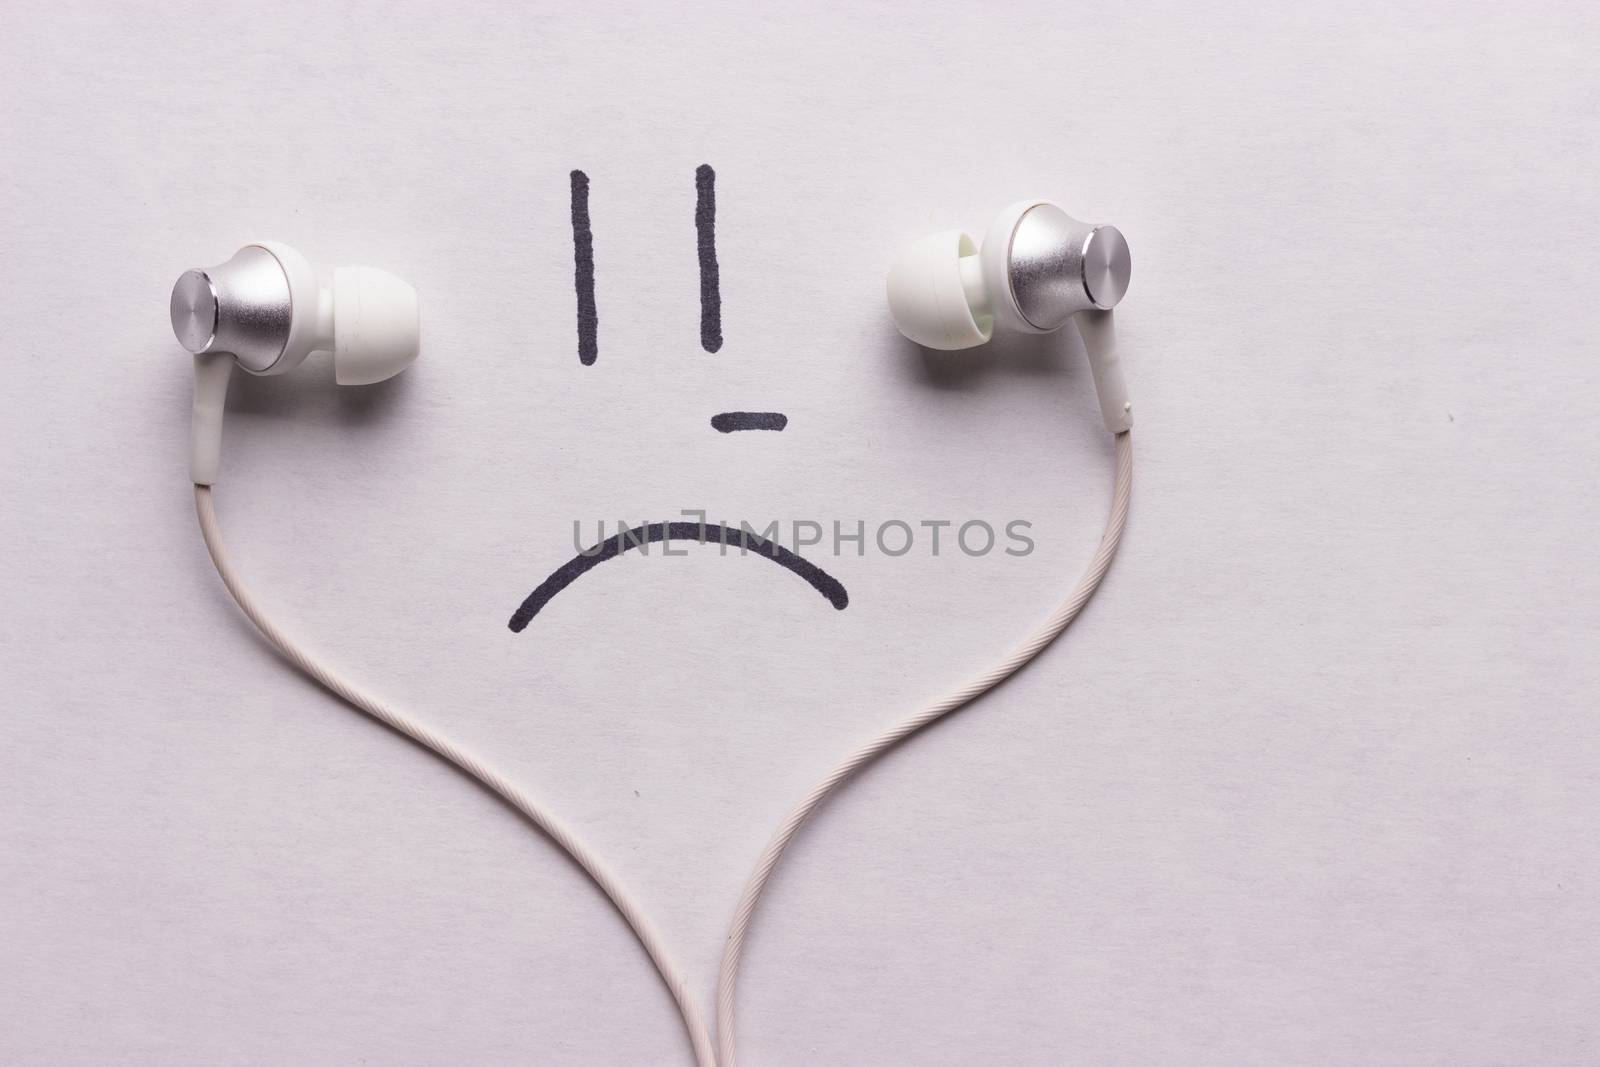 listen to sad music concept by liwei12